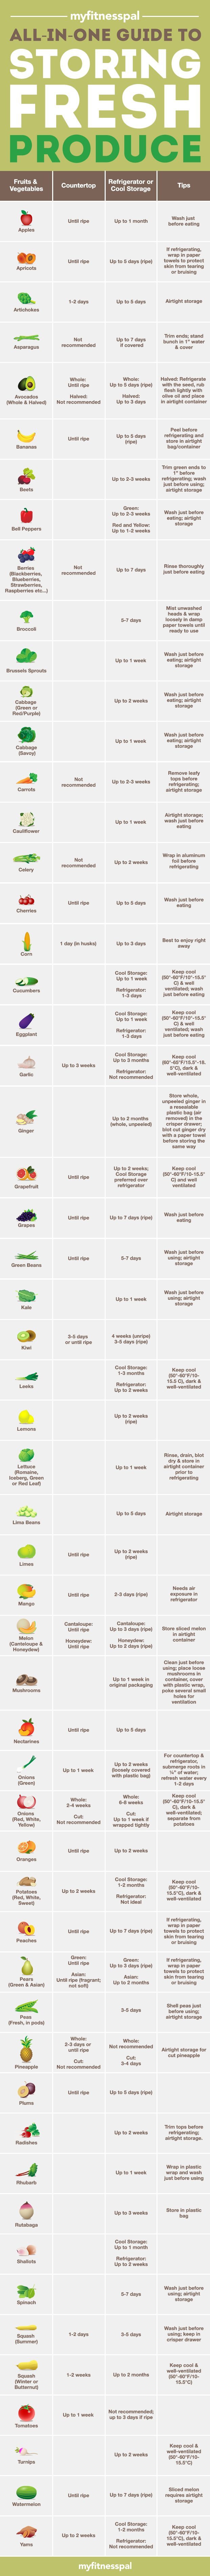 produce storage guide infographic